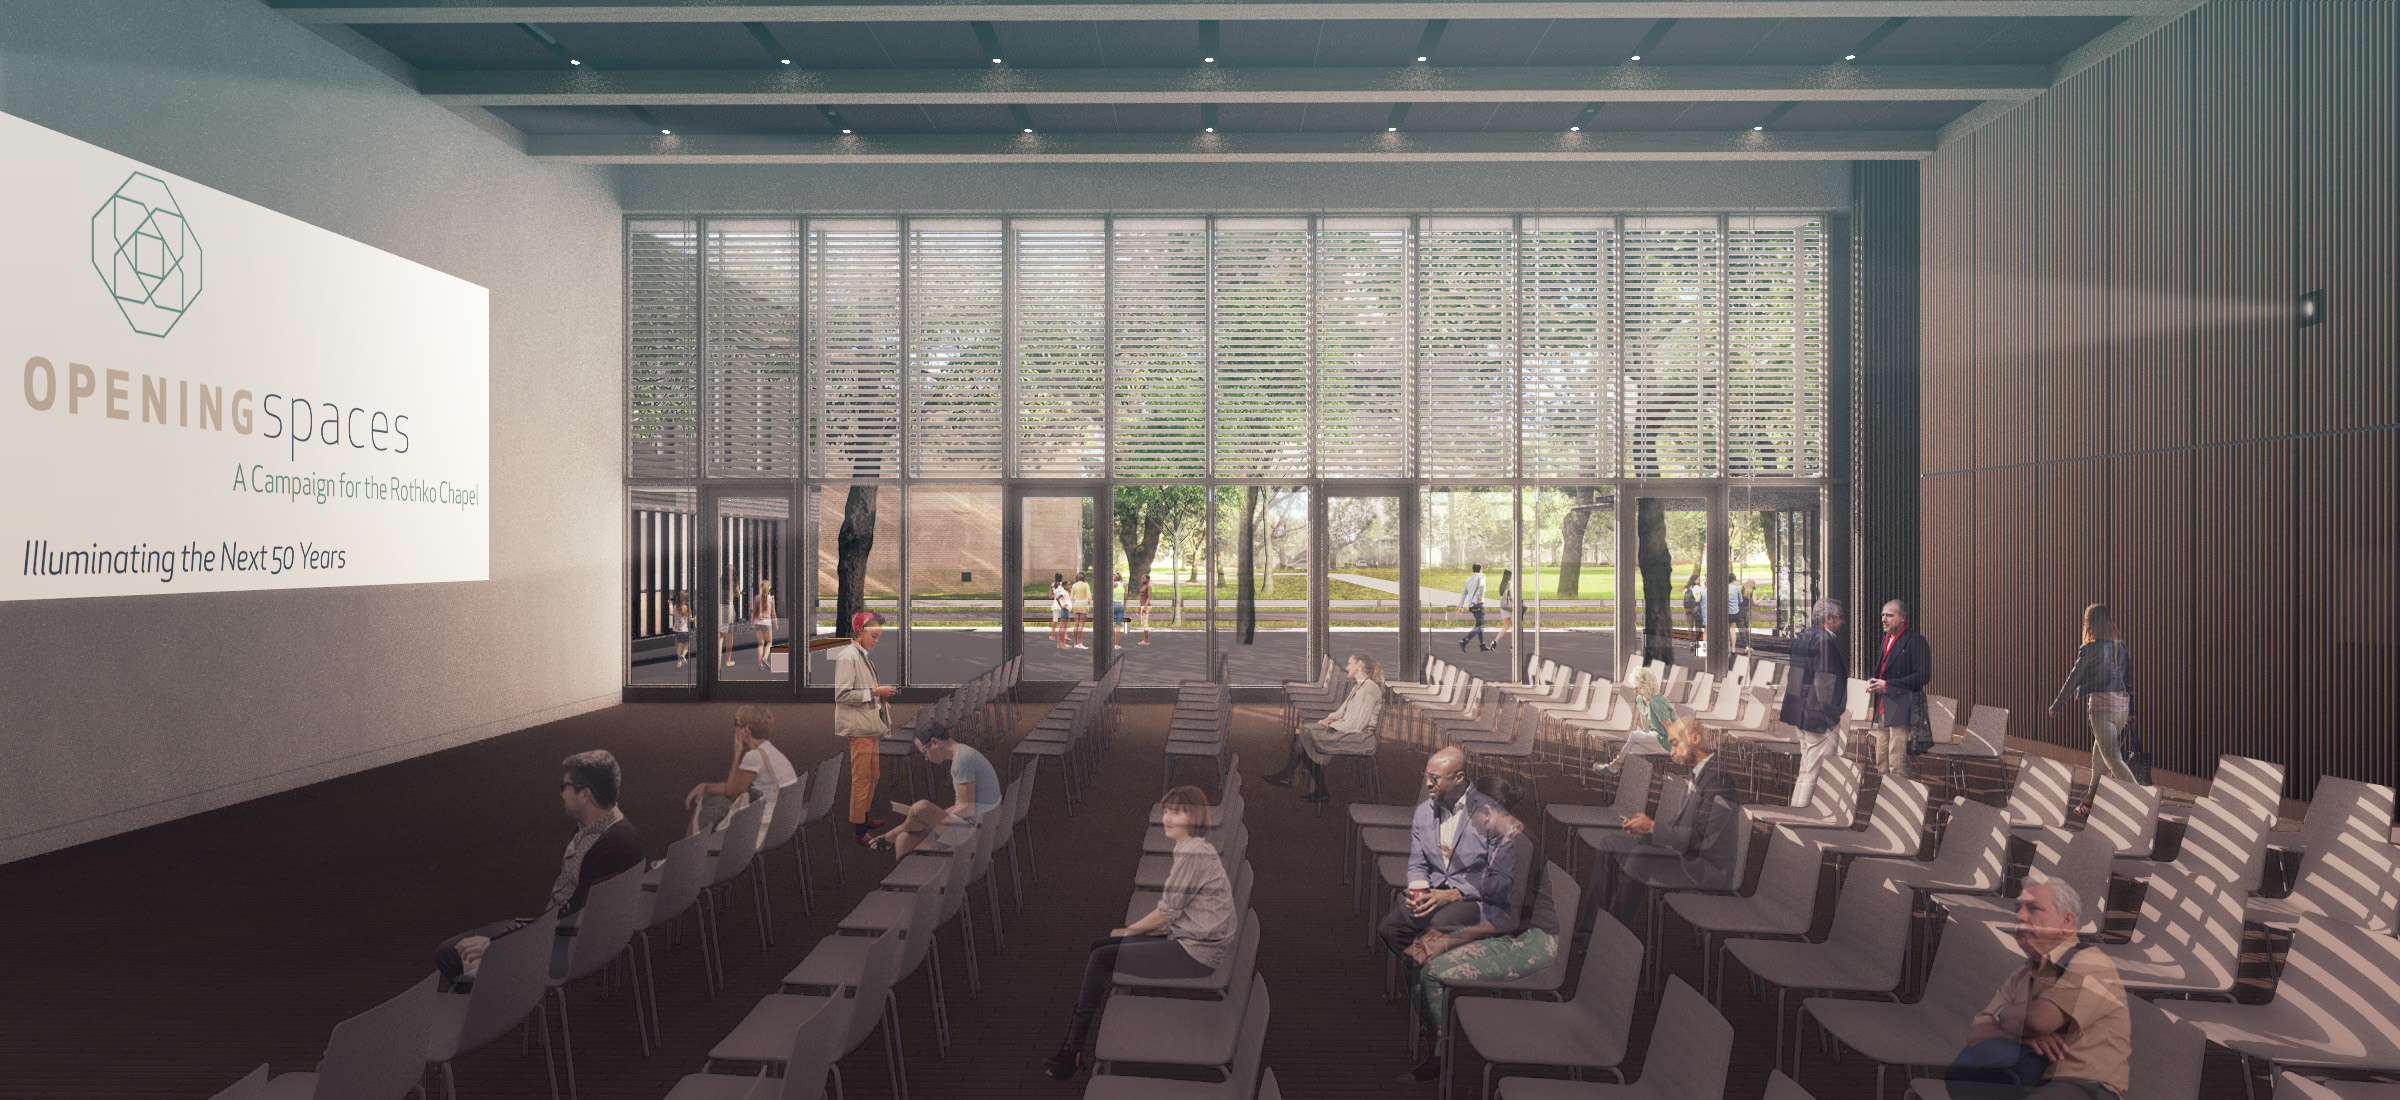 Projects Merit Award: A New Campus for the Rothko Chapel, by Architecture Research Office and Nelson Byrd Woltz Landscape Architects, in Houston, TX. Rendering: Architecture Research Office.